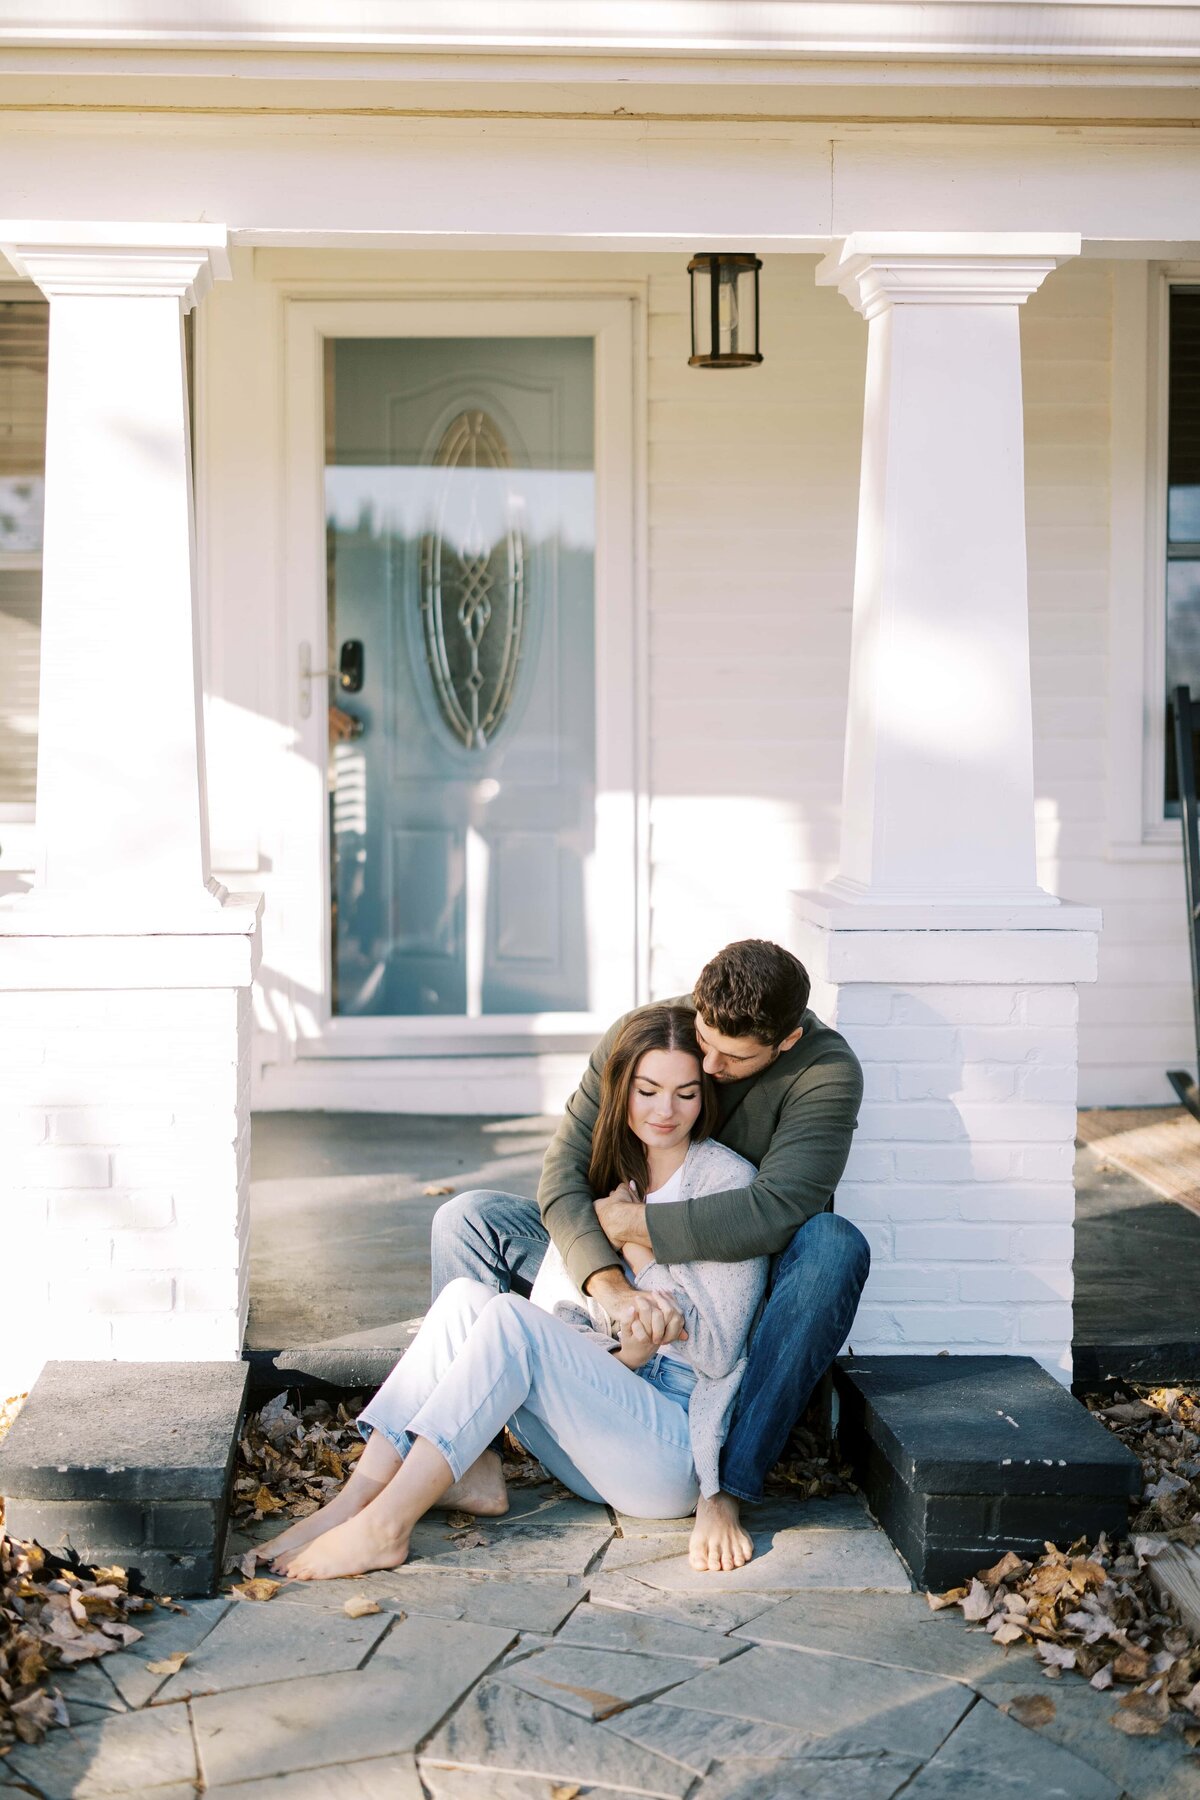 Young couple in comfortable clothes cuddling up together on the front porch of a white house with a pale blue door.